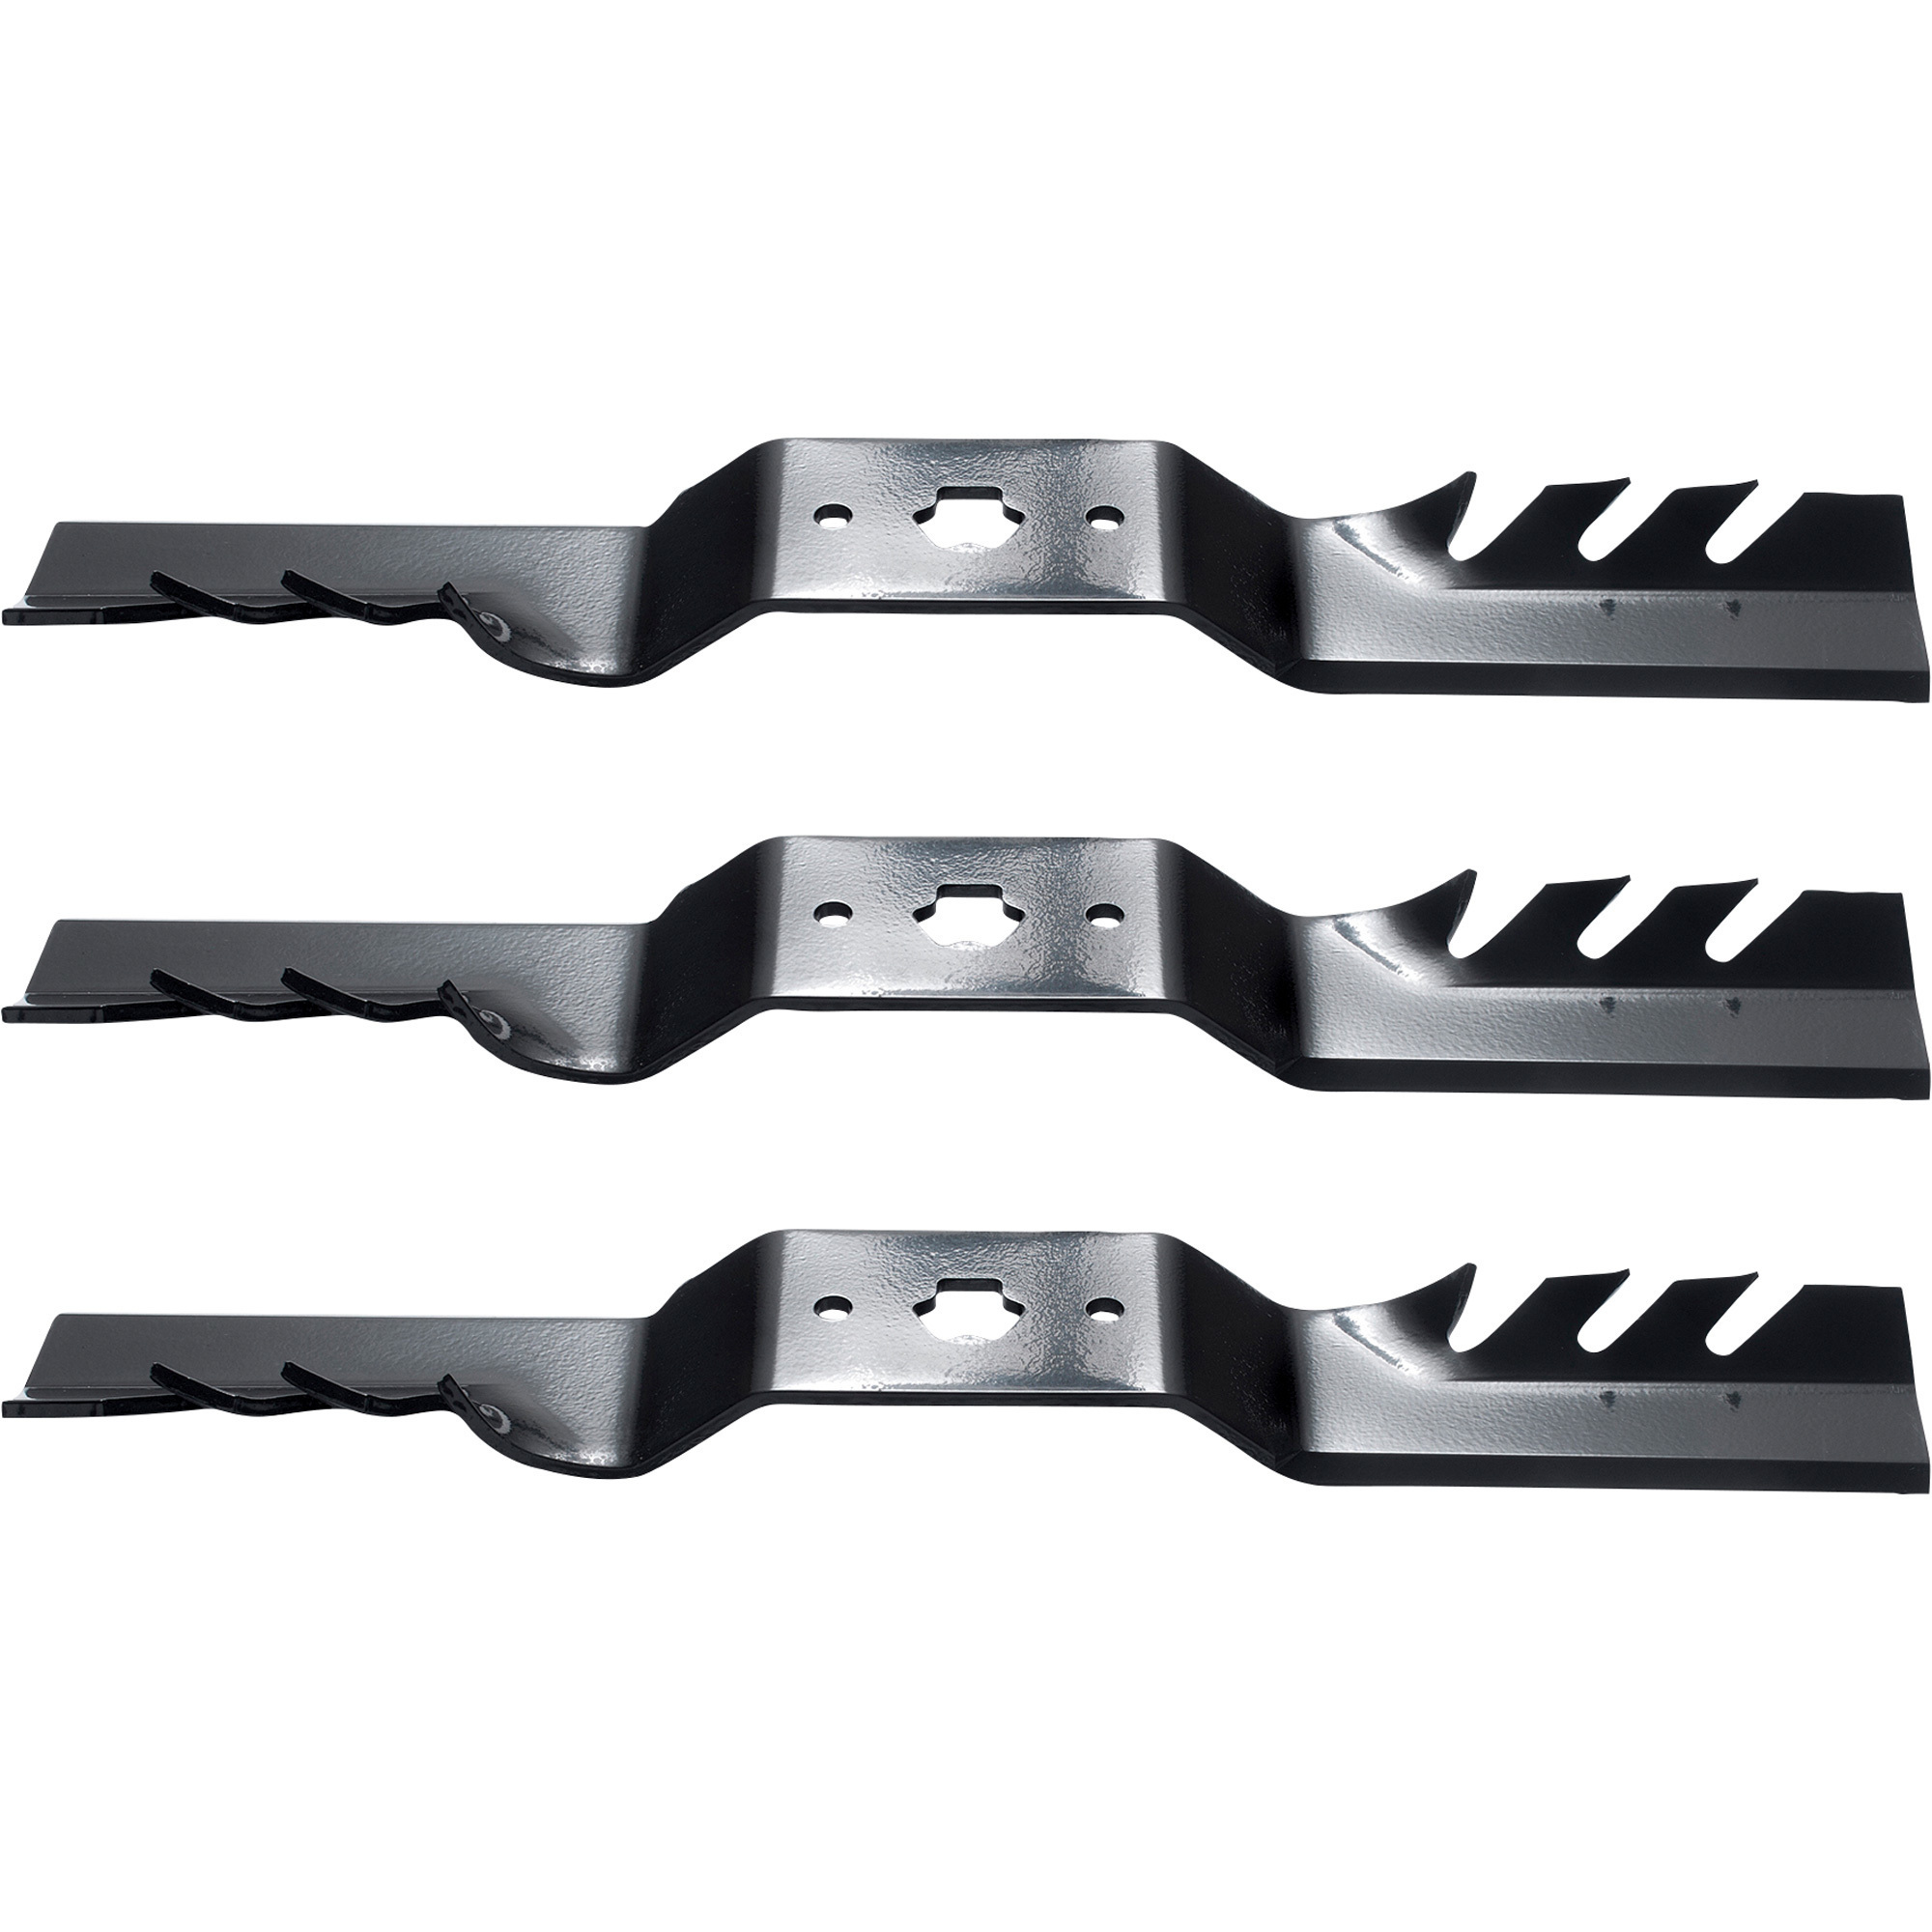 Oregon Gator Replacement Lawn Mower Blades, 3-Piece Set, Fits 50Inch Mowers, Model 528922